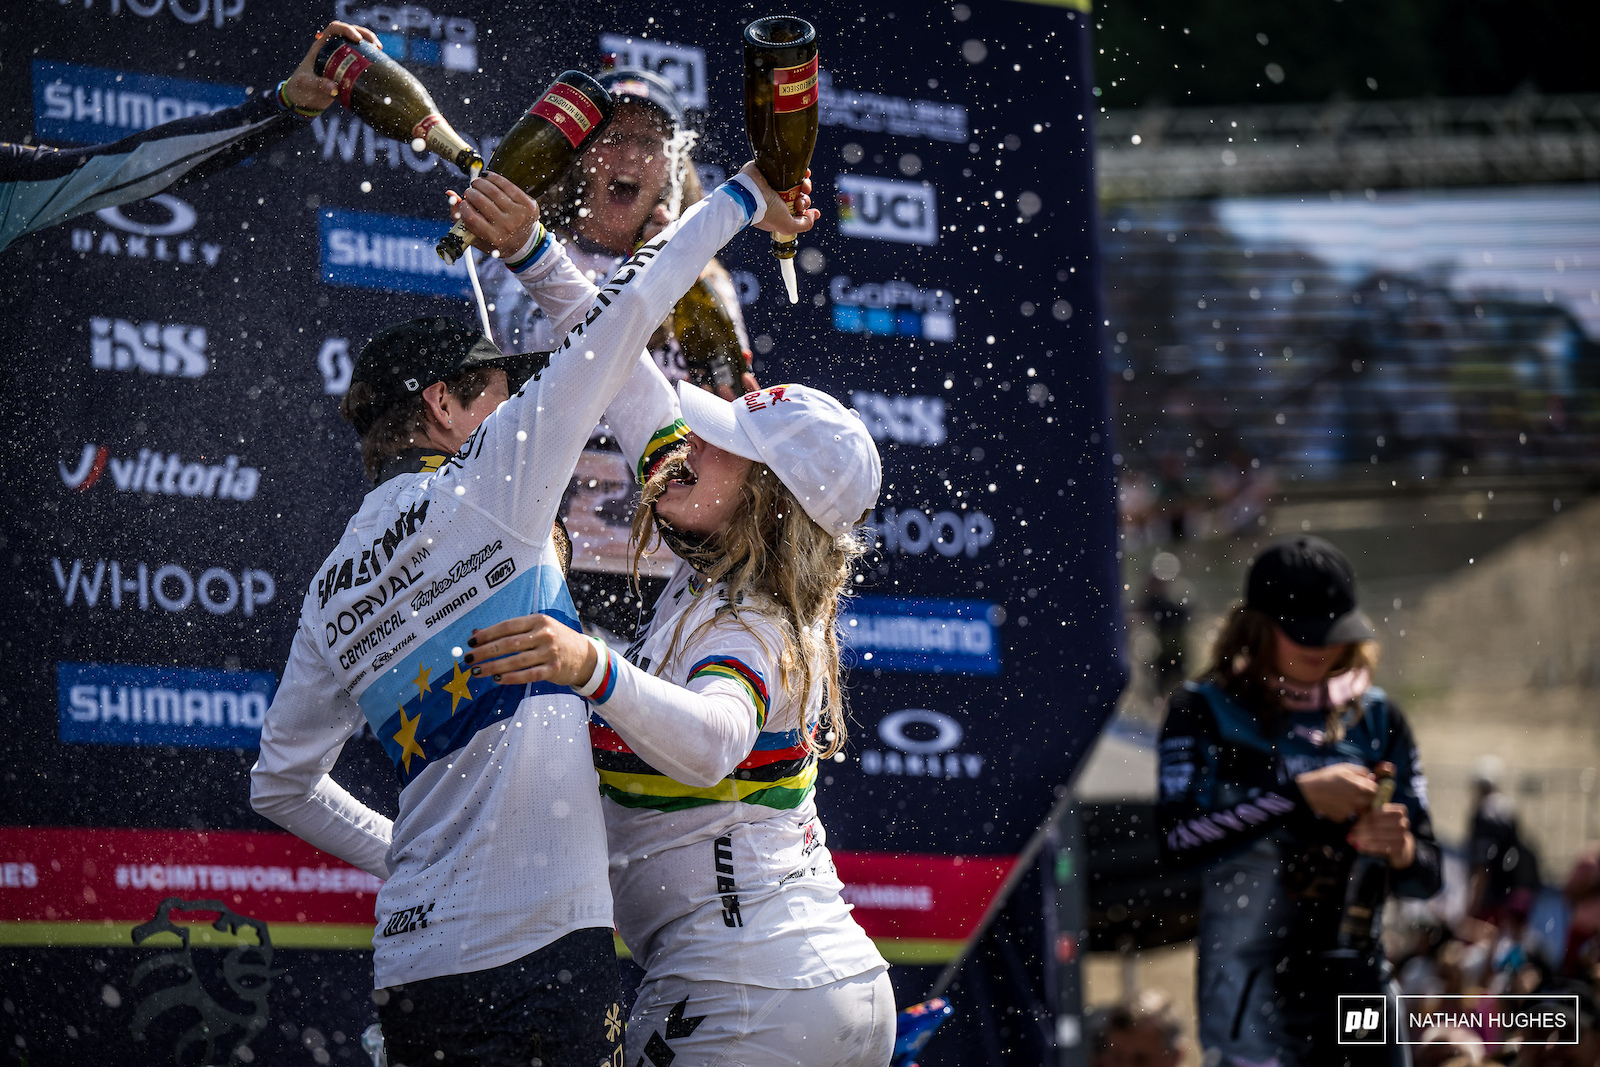 Champagne showers for one and all on the podium.